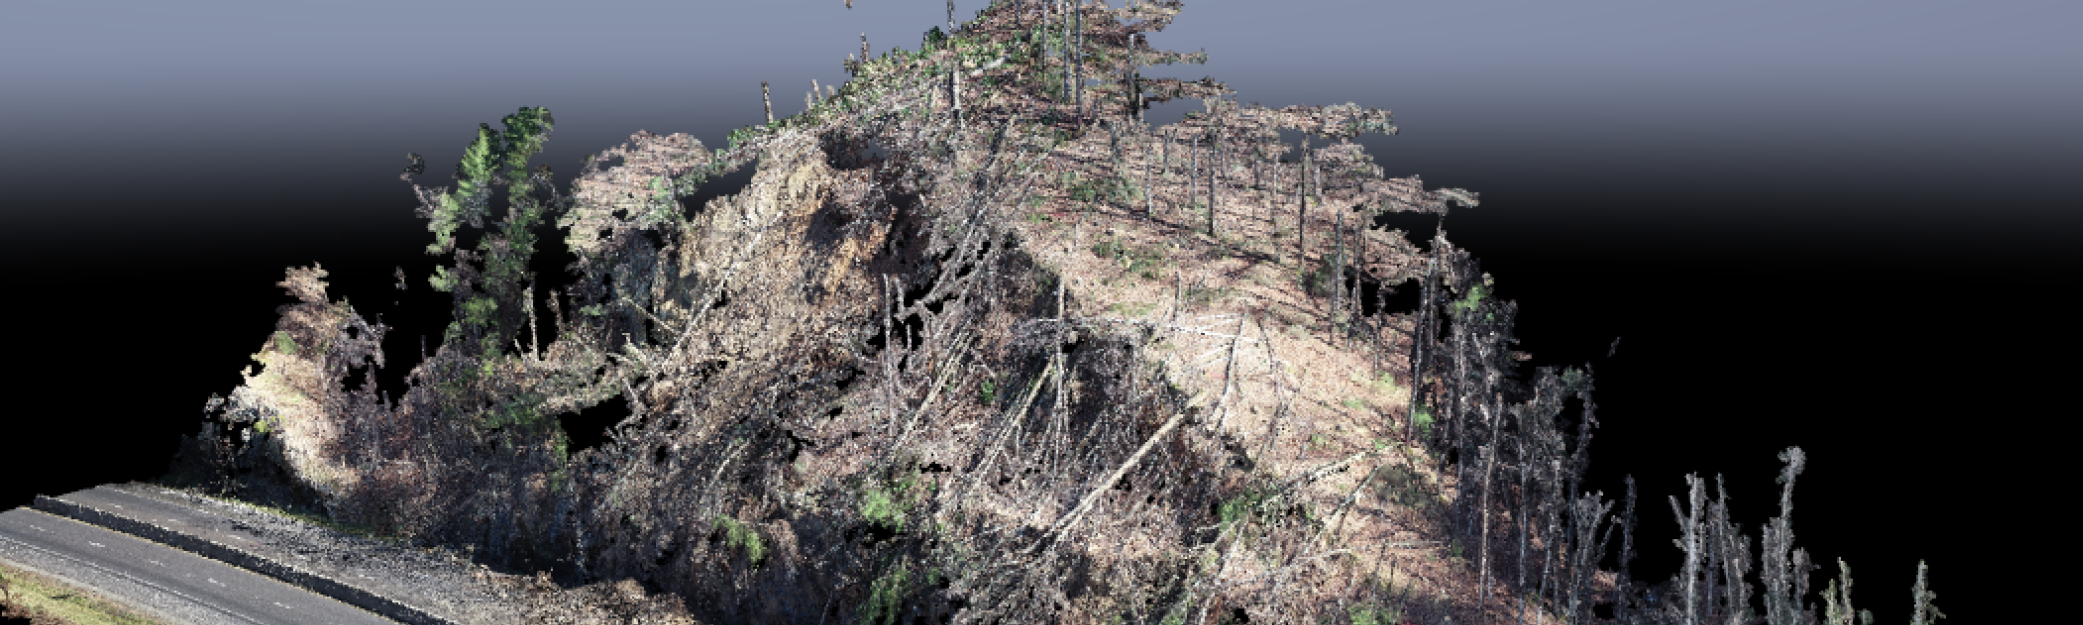 DRMP Uses UAV Technology to Survey and Reduce Damage in NC Landslides 